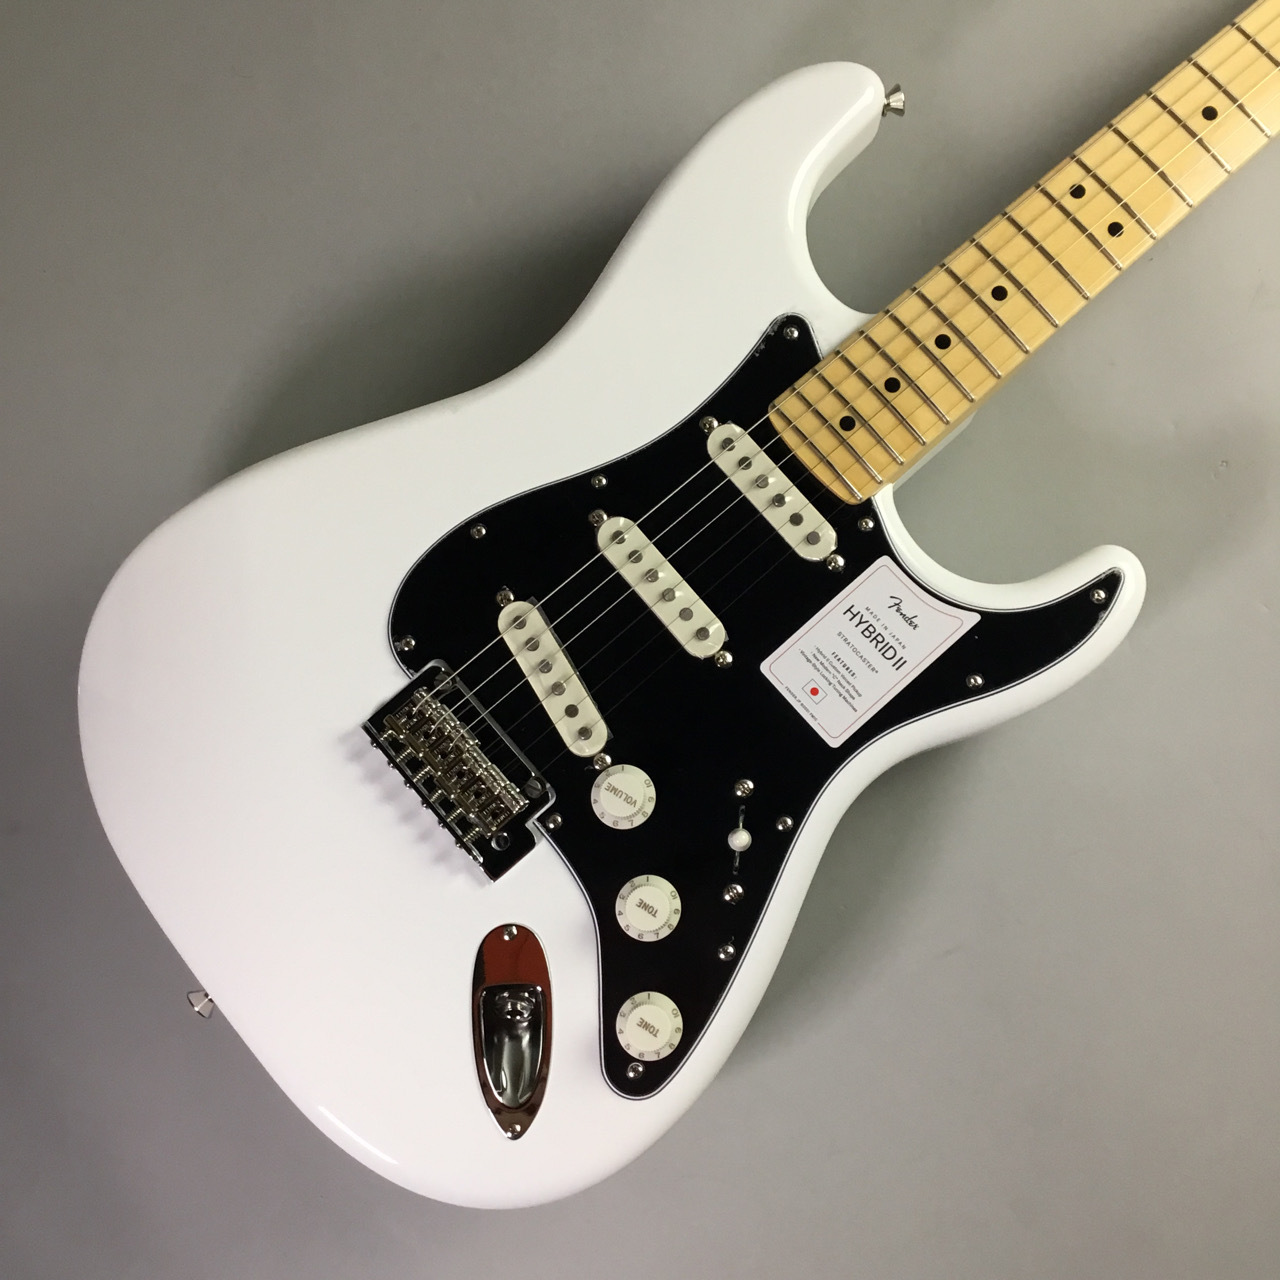 Squier Ⅱ STRATOCASTER by Fender